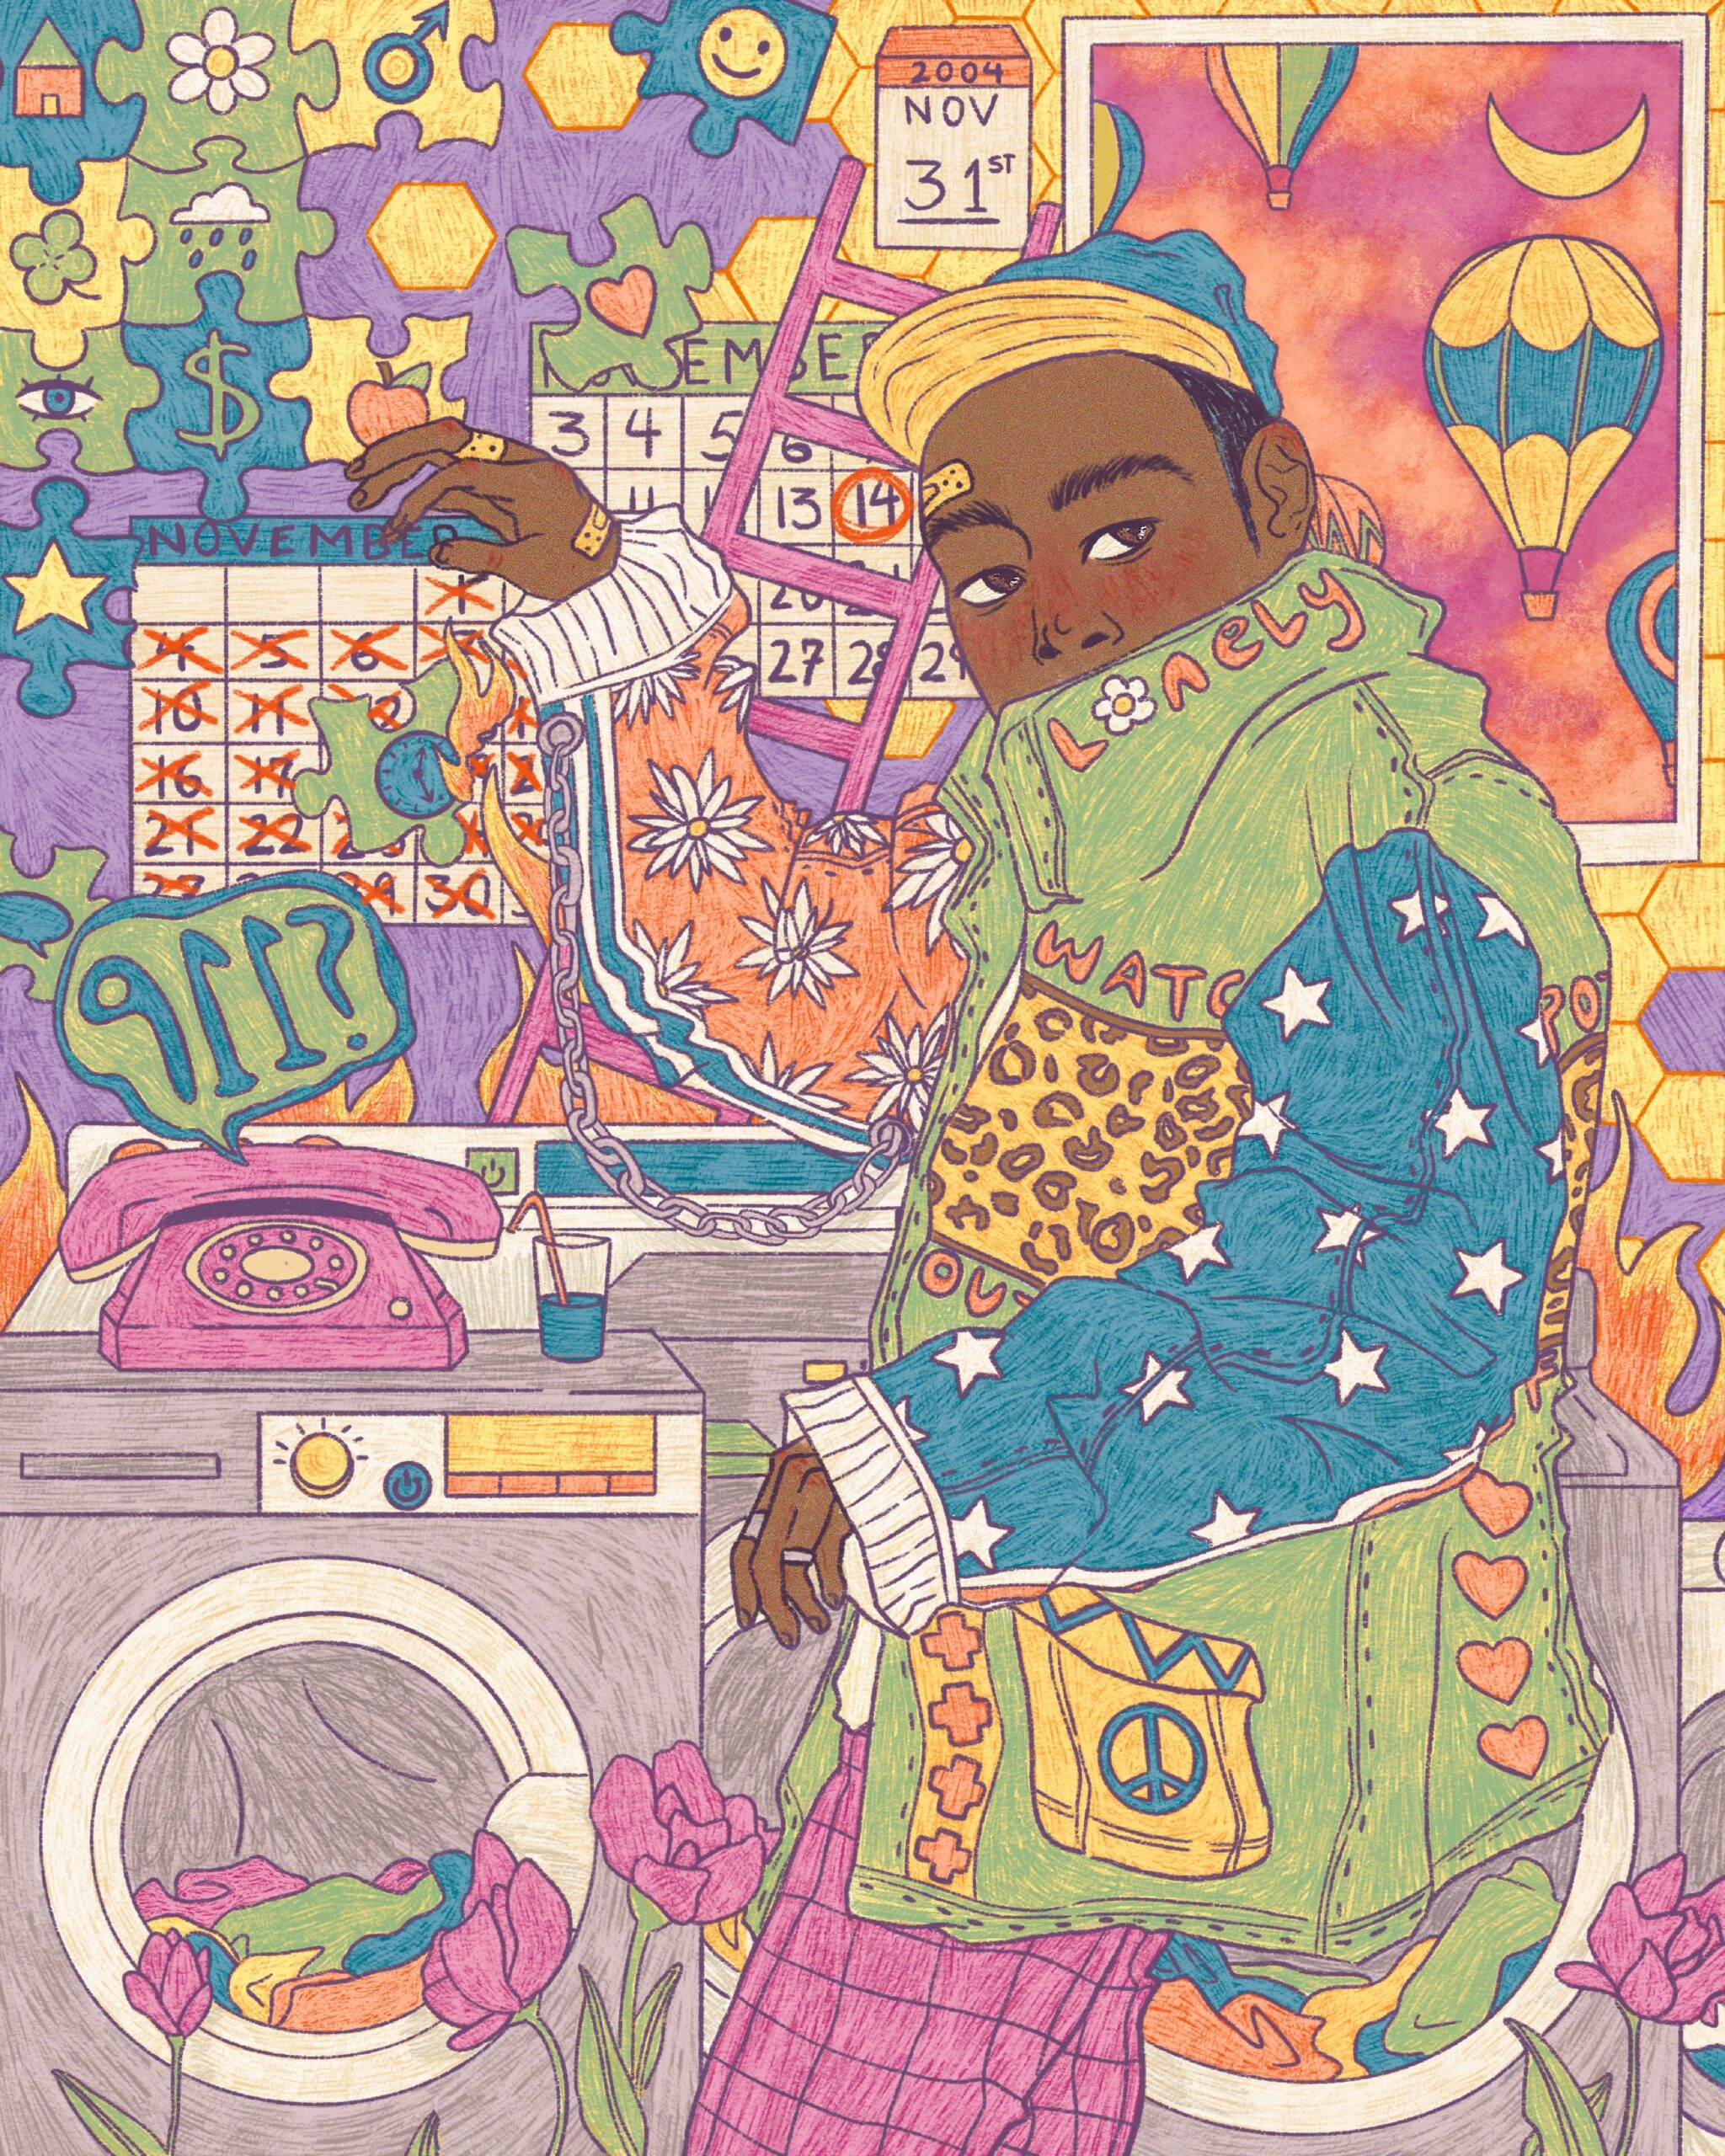 This scene is a jumble of bright pink, yellow, orange, teal, lilac and green. A Black boy turns to look at us over his shoulder while touching a ‘November’ calendar above a phone urgently declaring ‘911!’ in a speech bubble. The boy’s outfit is mis-matched – leopard print, star spangles, peace signs, chains, checks. On his collar is the word ‘lonely,’ written in bubble letters. The wallpaper is a chaotic puzzle-pieces motif. A poster of hot air balloons hangs in the background.